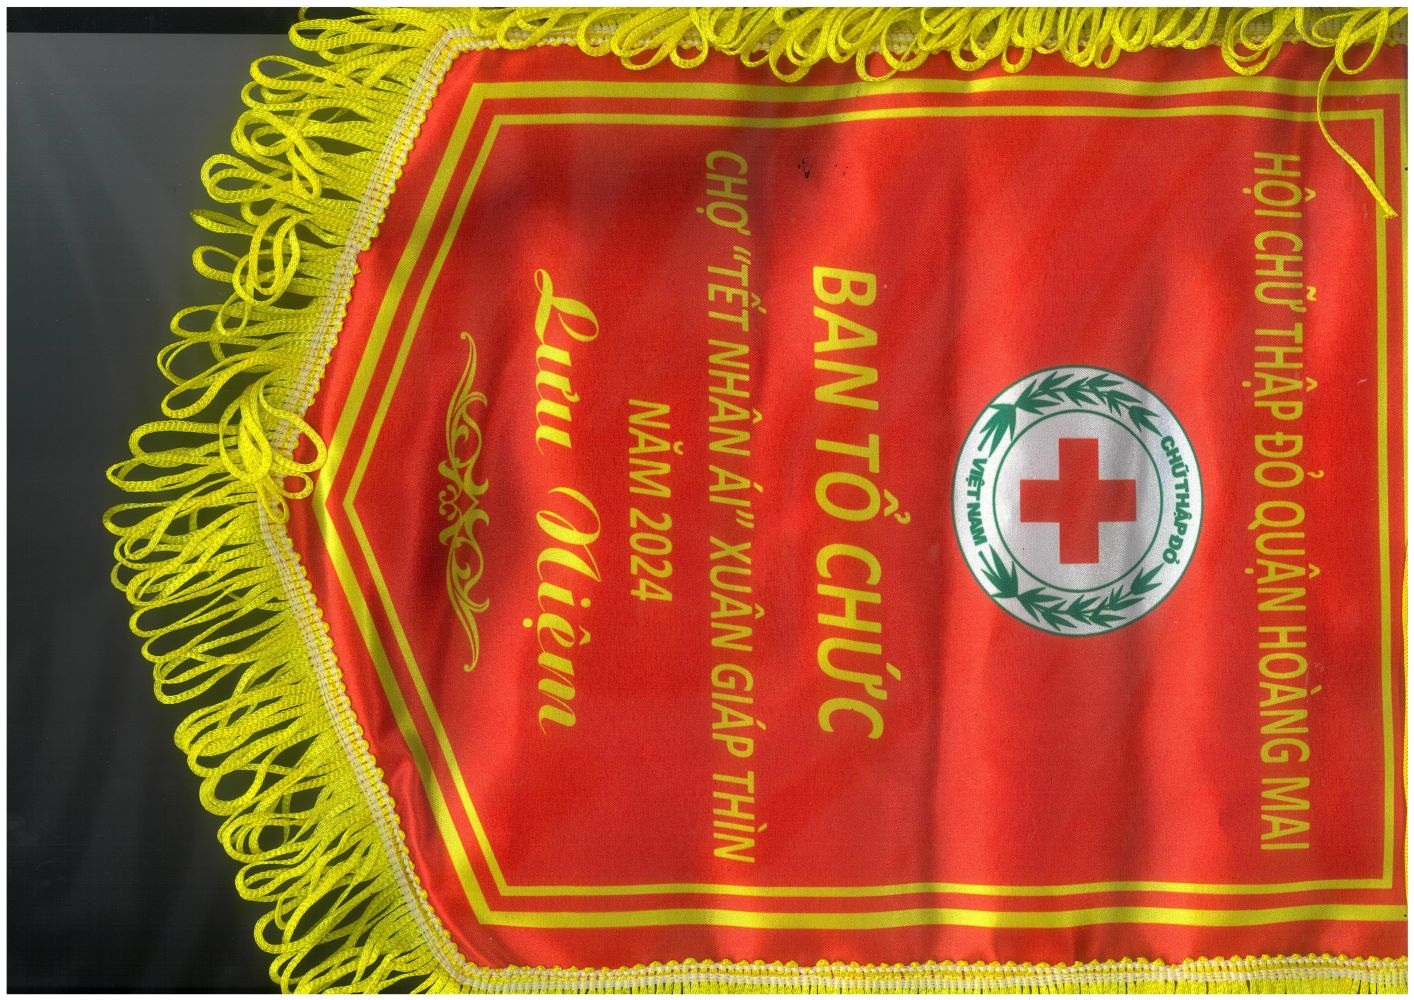 Souvenir flag from Organizing Committee.